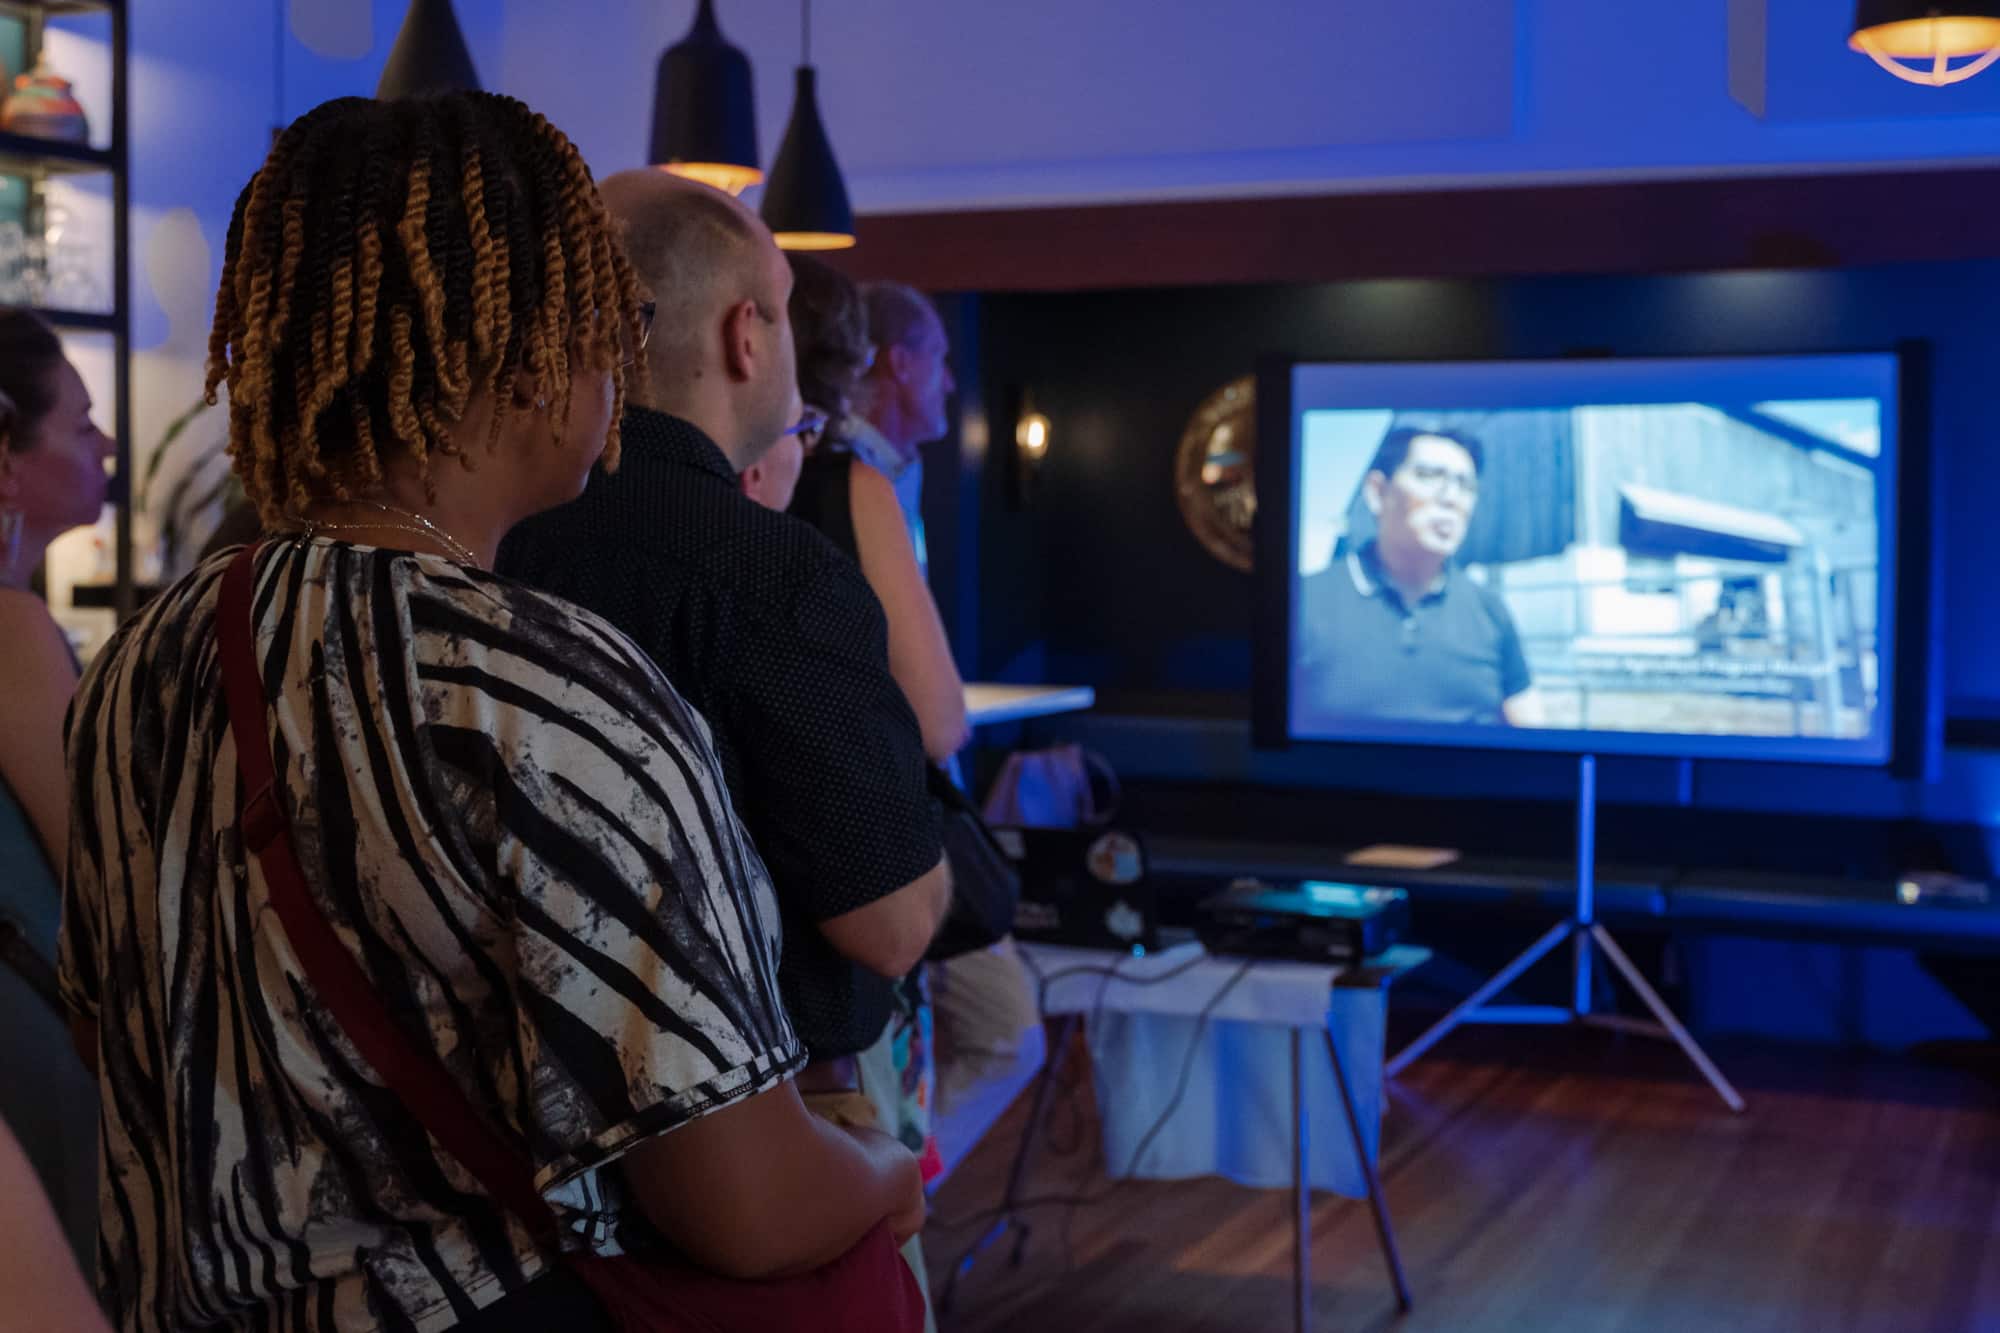 A group of people gathering around a large screen showing the Alliance's 2023 Impact Video at the Taste event.